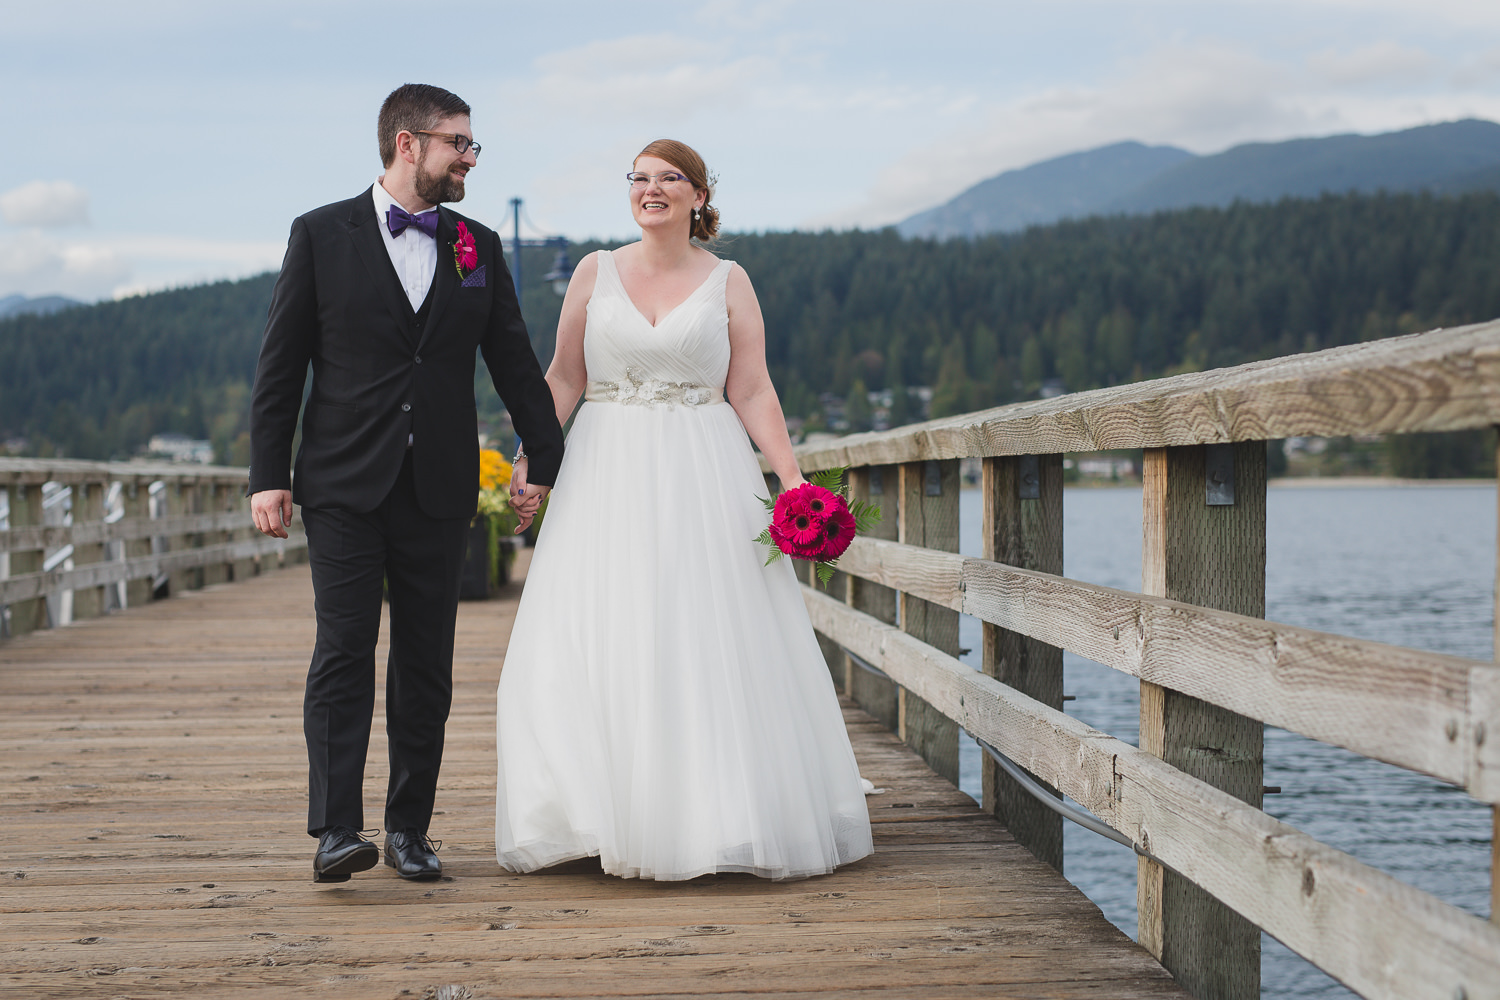 Bride and groom at Rocky Point Park wedding, walking on the dock, by Port Moody wedding photographer